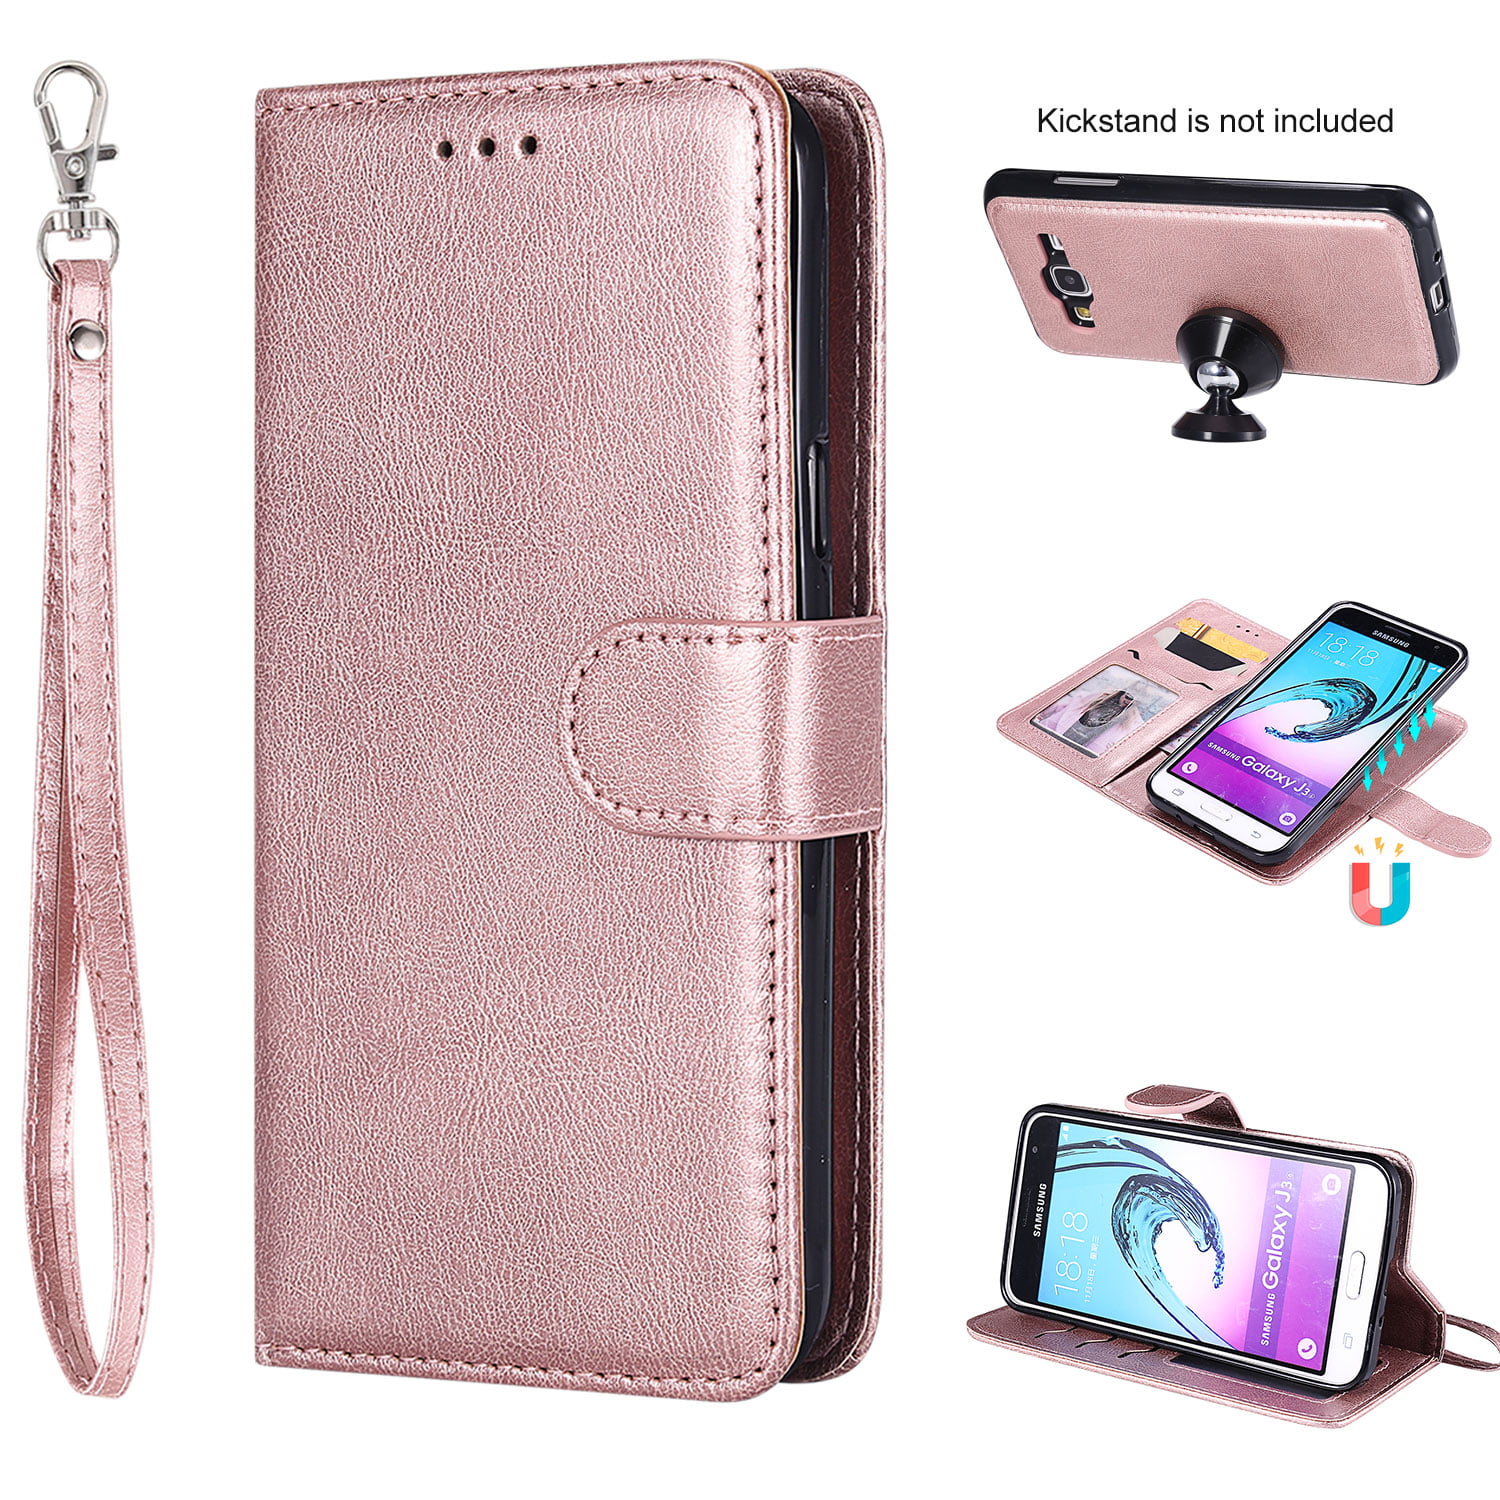 XYX Love Heart PU Leather Wallet Case for Samsung Galaxy J3 V J3 2016